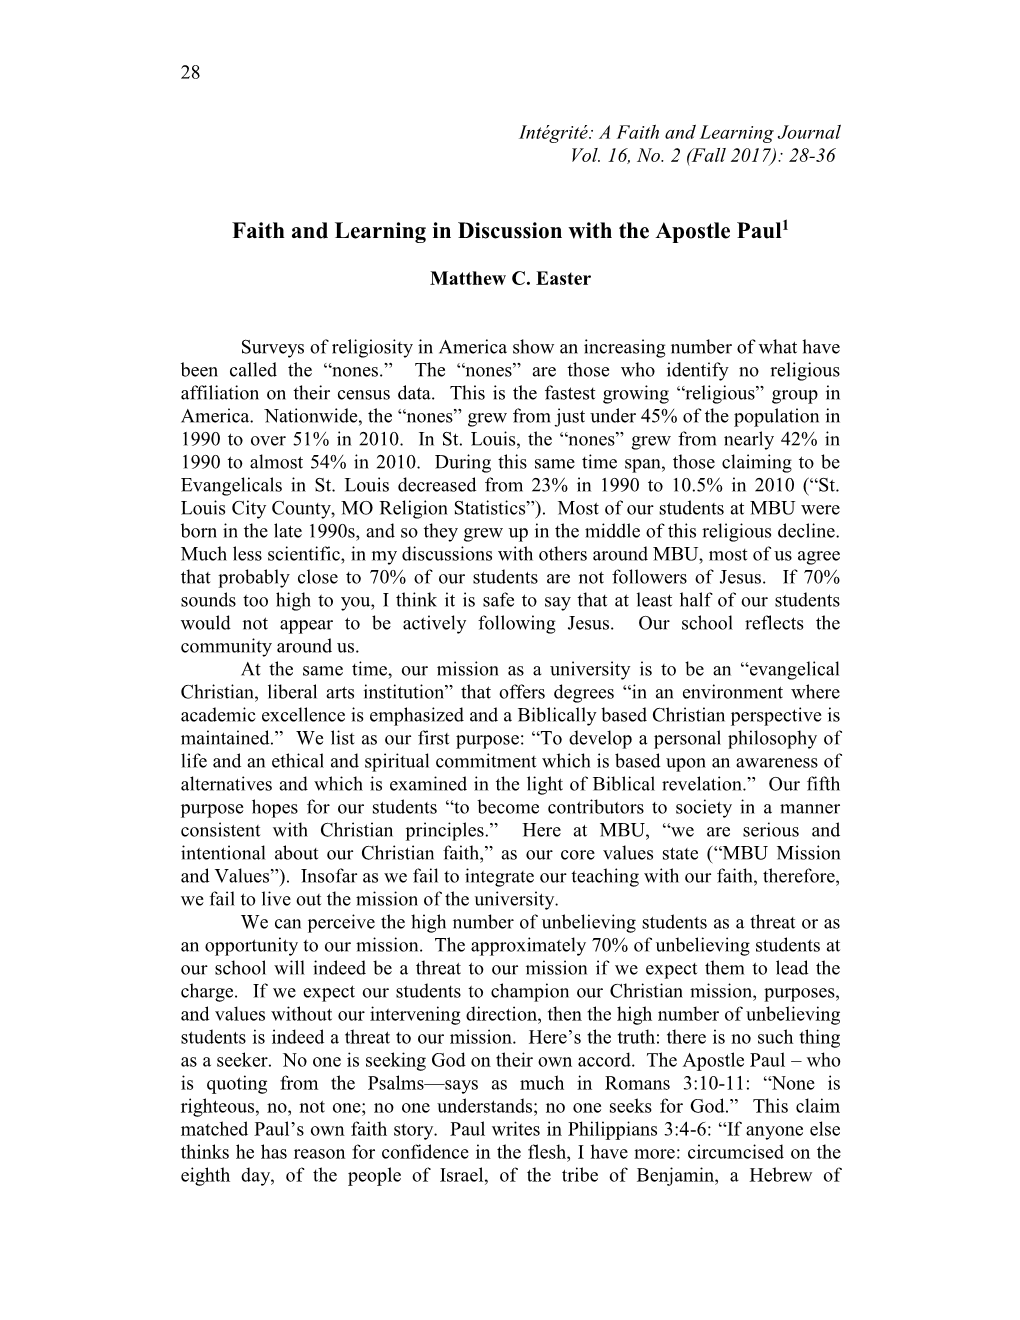 Faith and Learning in Discussion with the Apostle Paul1